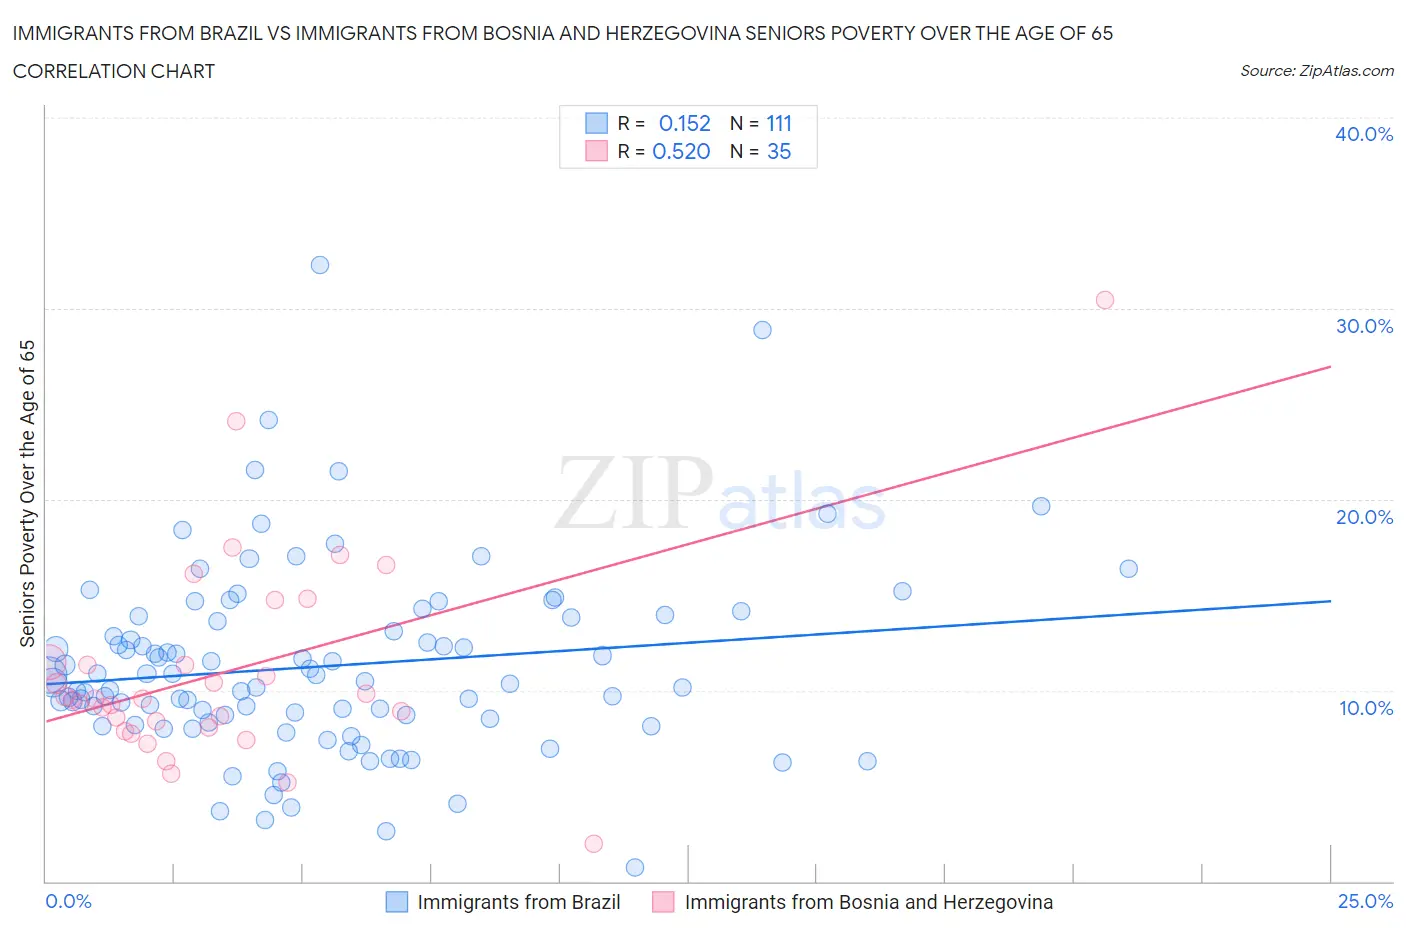 Immigrants from Brazil vs Immigrants from Bosnia and Herzegovina Seniors Poverty Over the Age of 65